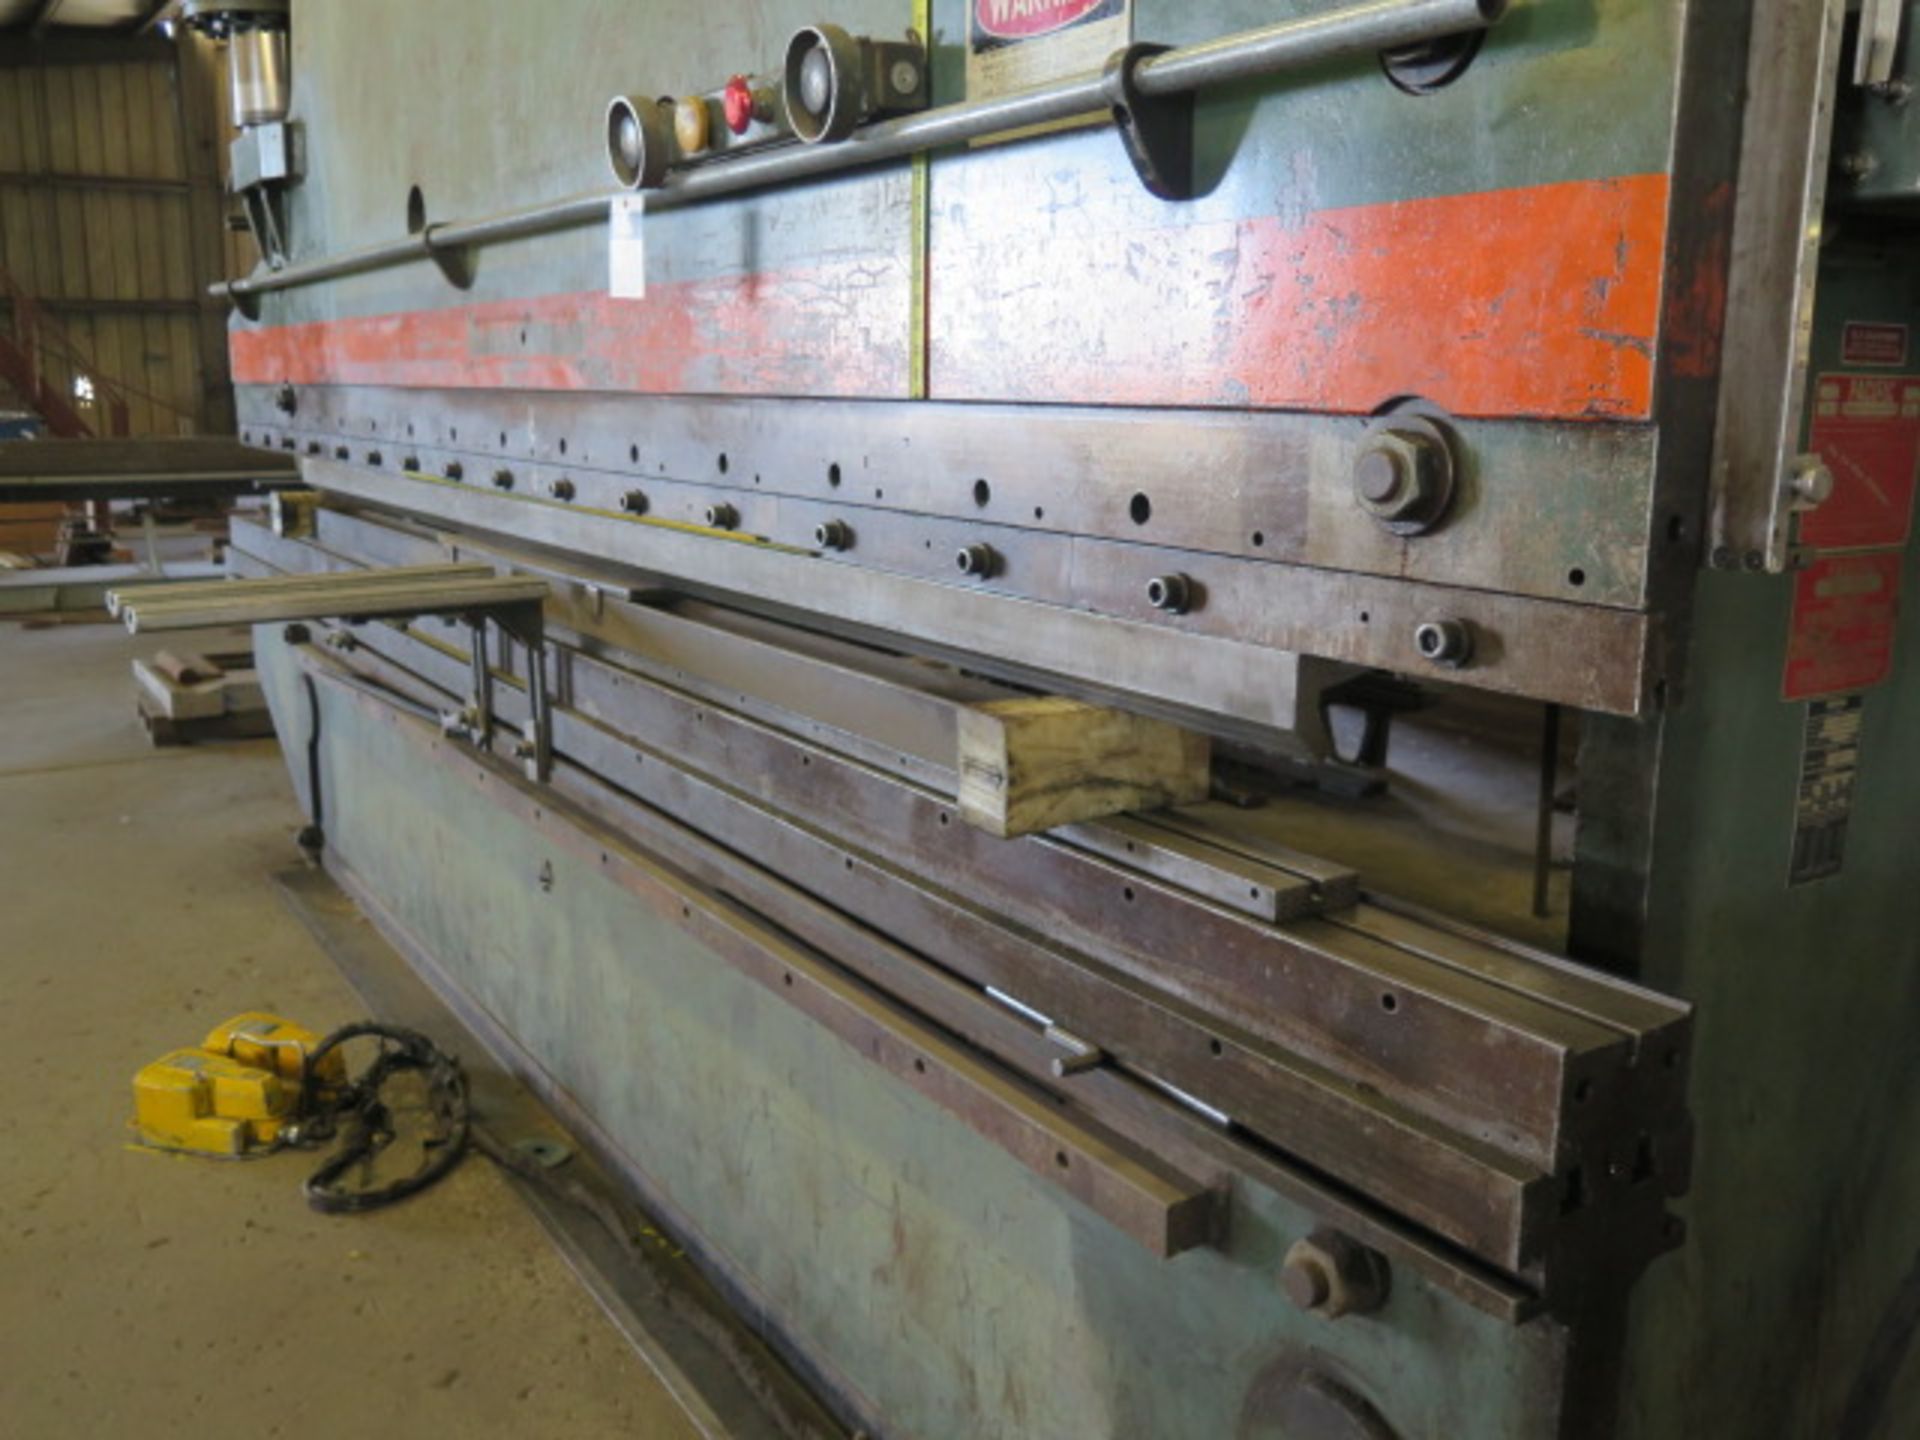 Pacific K300-16 5 1/6” x 14’ Hydraulic Press Brake s/n 6909 w/ 16’ Bed Length, SOLD AS IS - Image 6 of 16